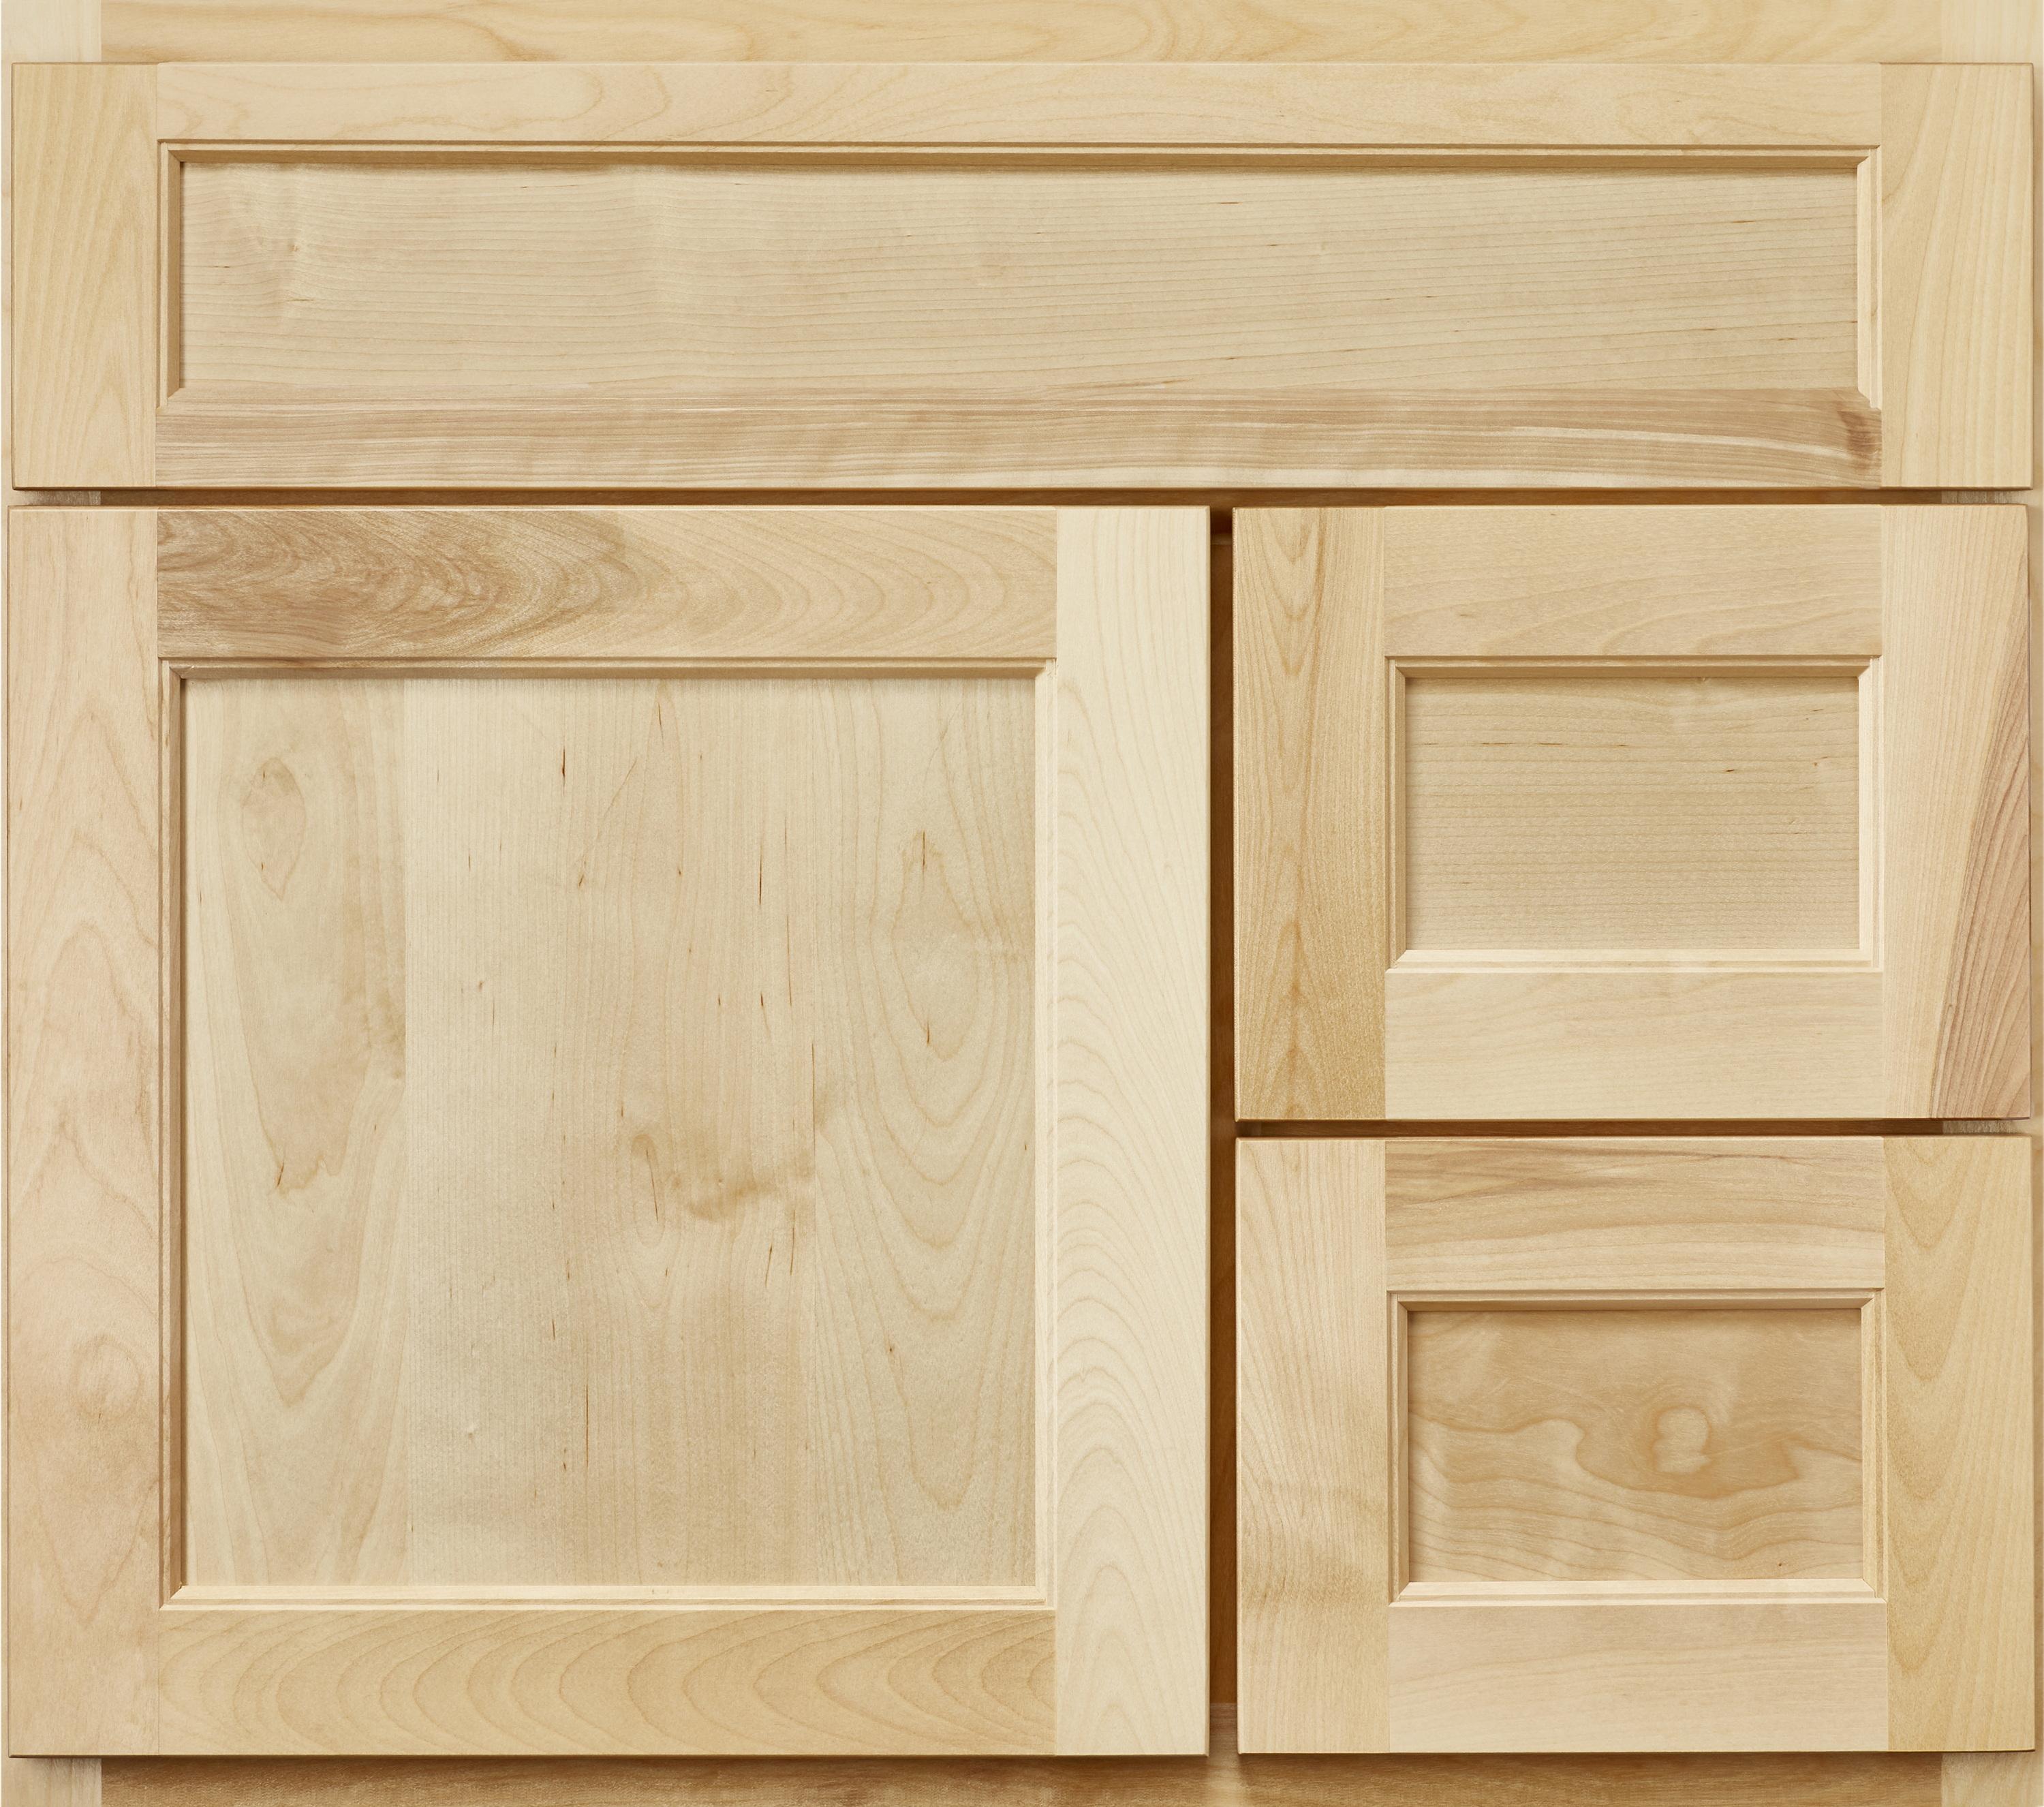 Edgewood Style Vanity Cabinets - Bertch Cabinets